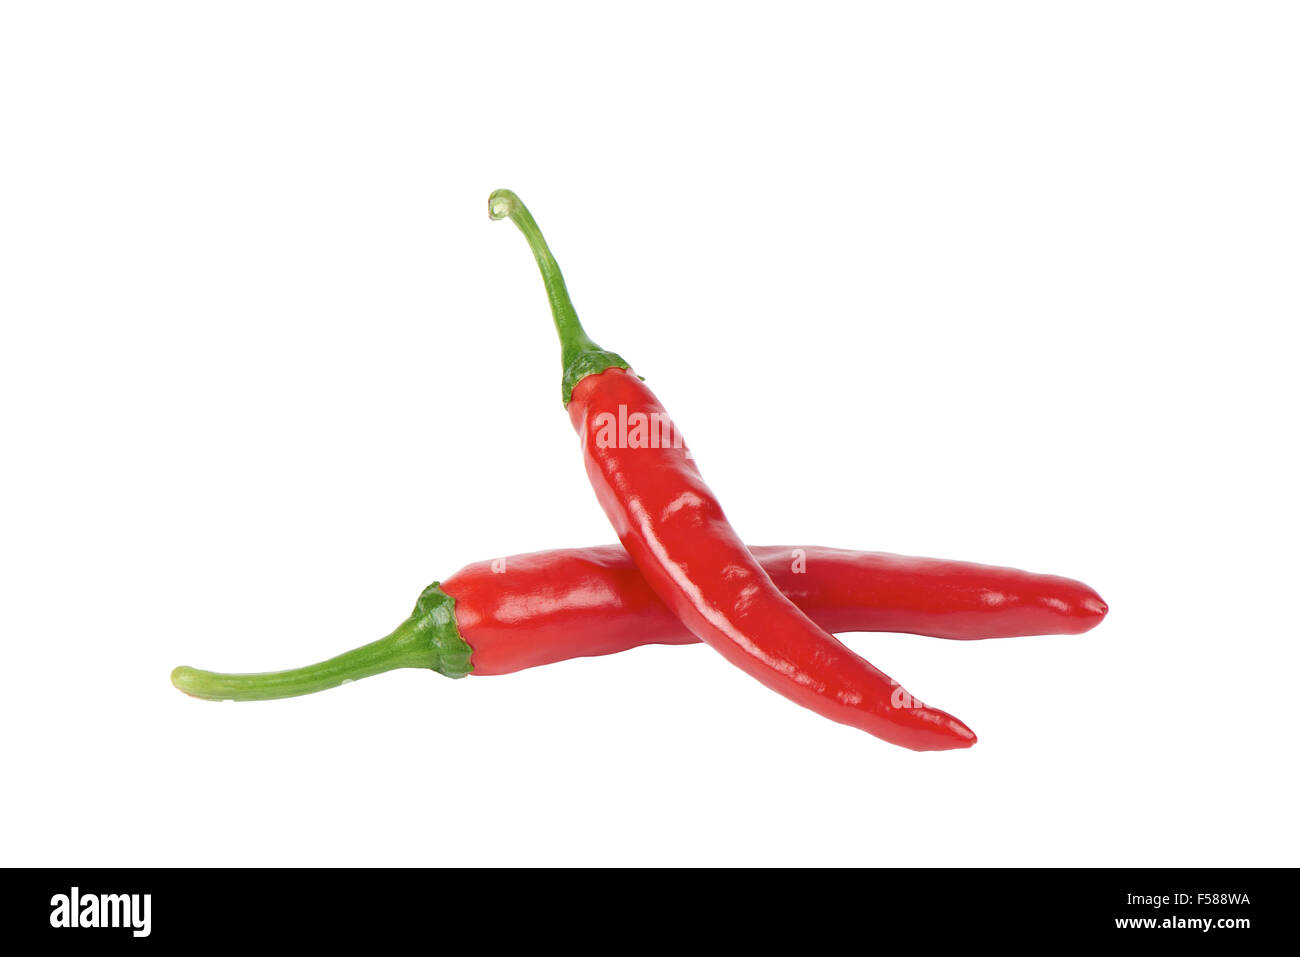 Korean red chili peppers, isolated on white Stock Photo